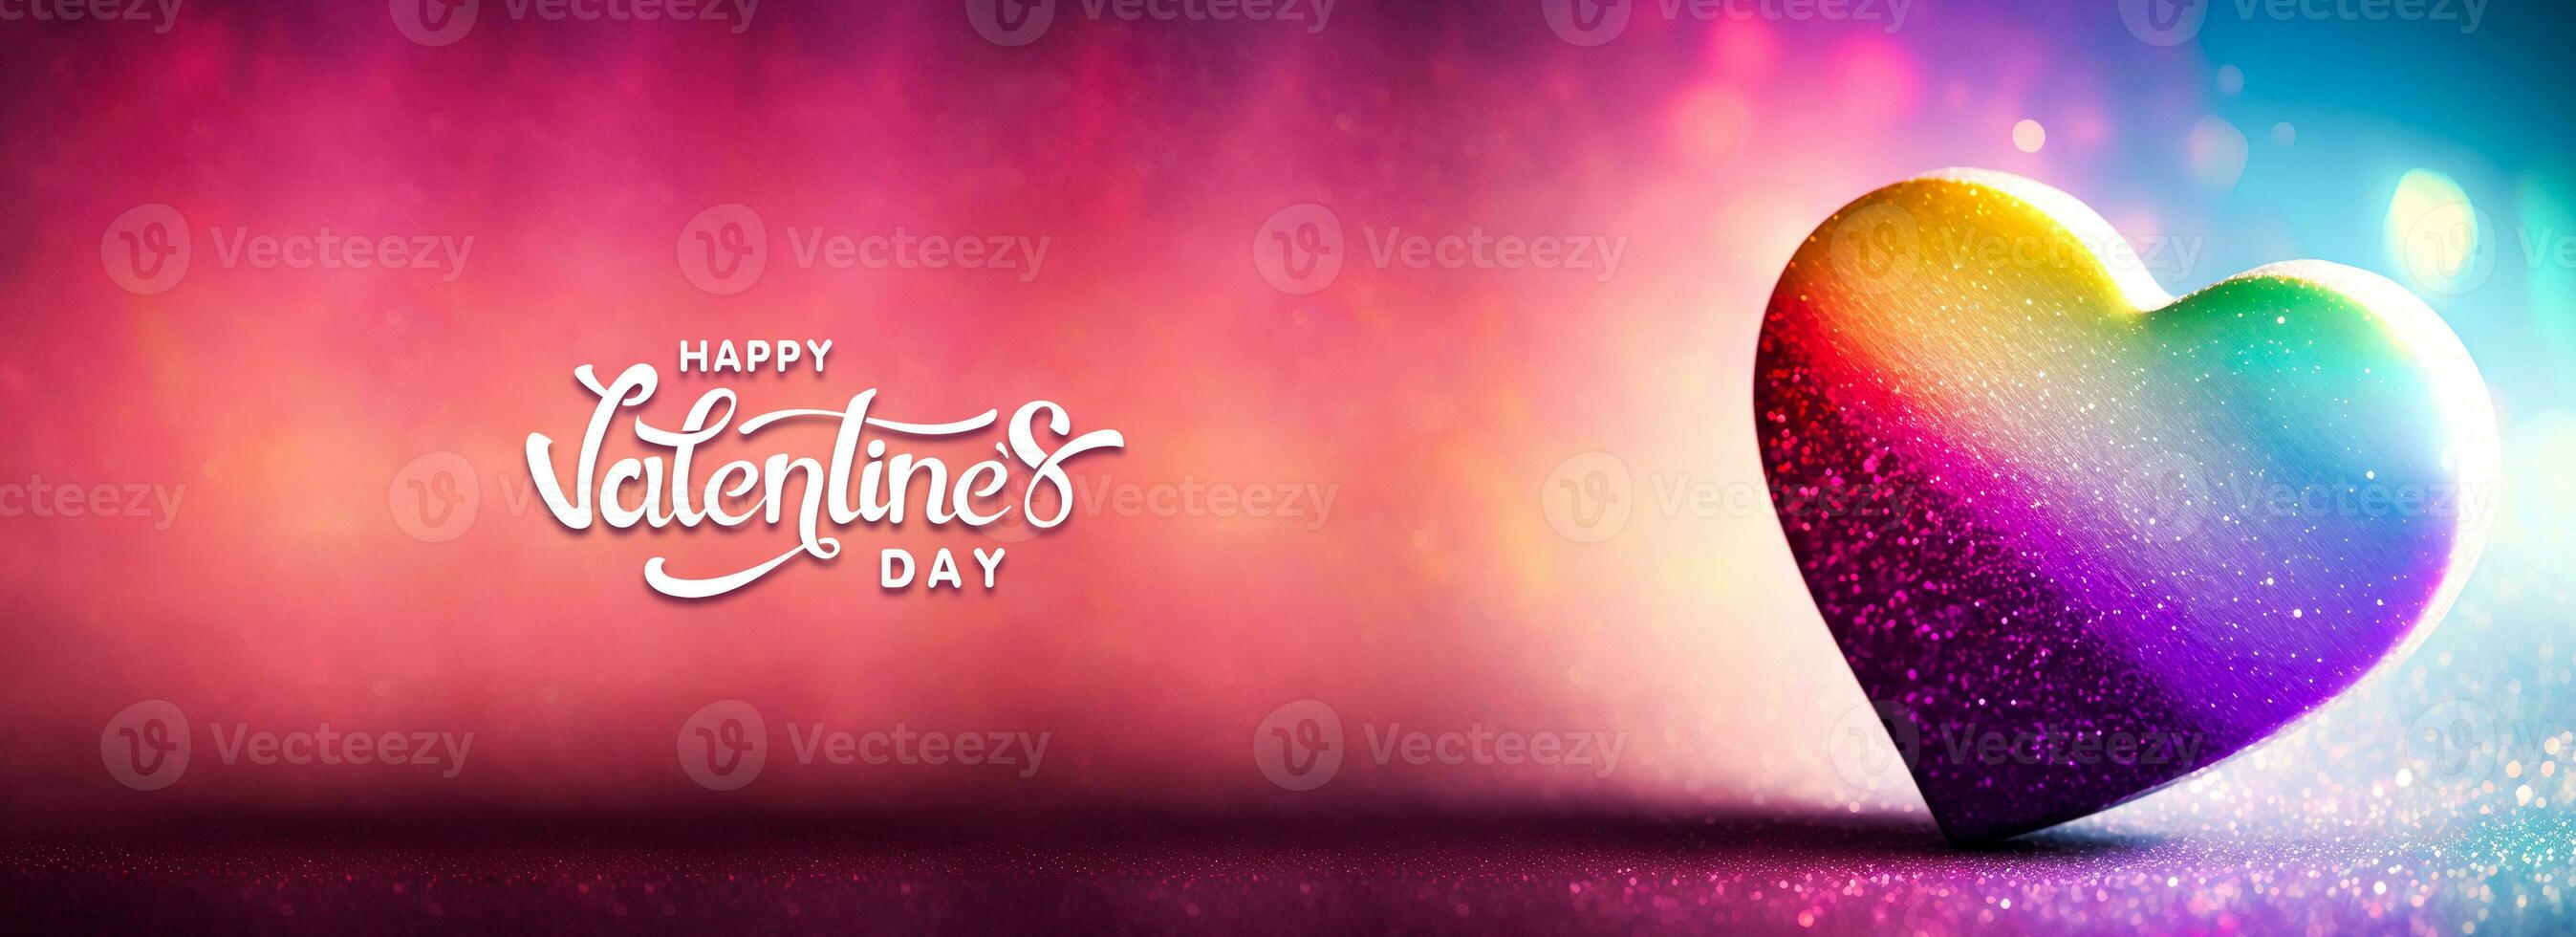 Happy Valentine's Day Text With 3D Render Of Shiny Colorful Glittery Heart Shape On Rainbow Bokeh Background. photo